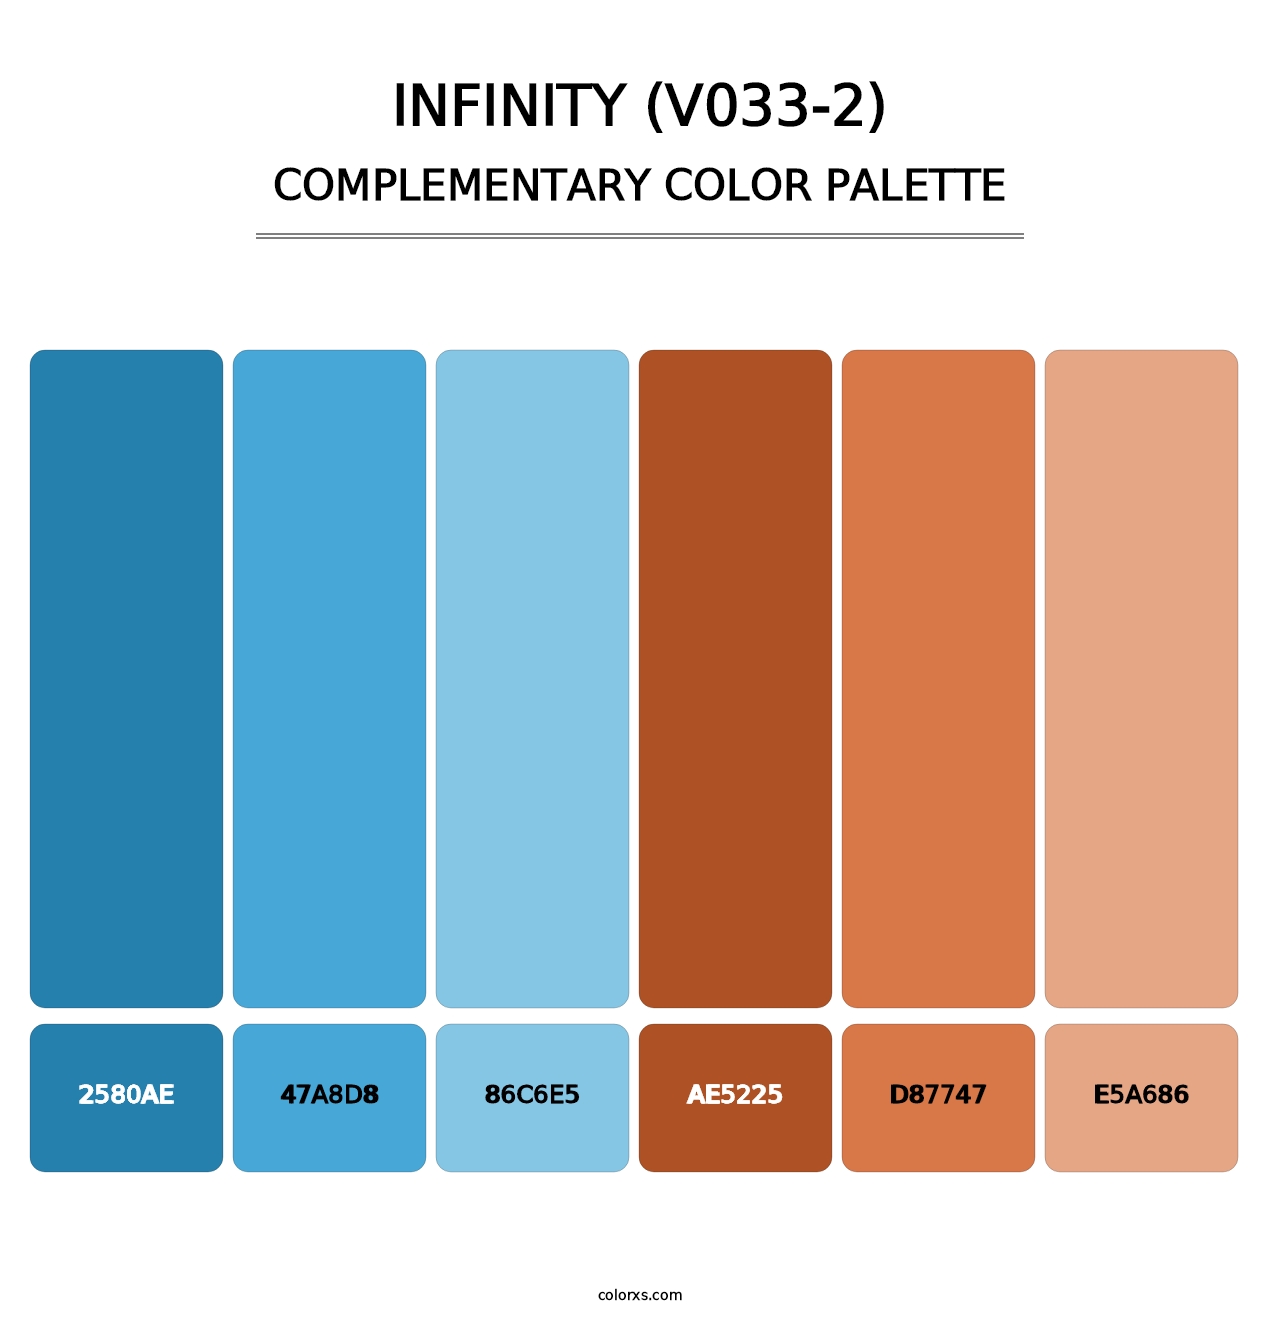 Infinity (V033-2) - Complementary Color Palette